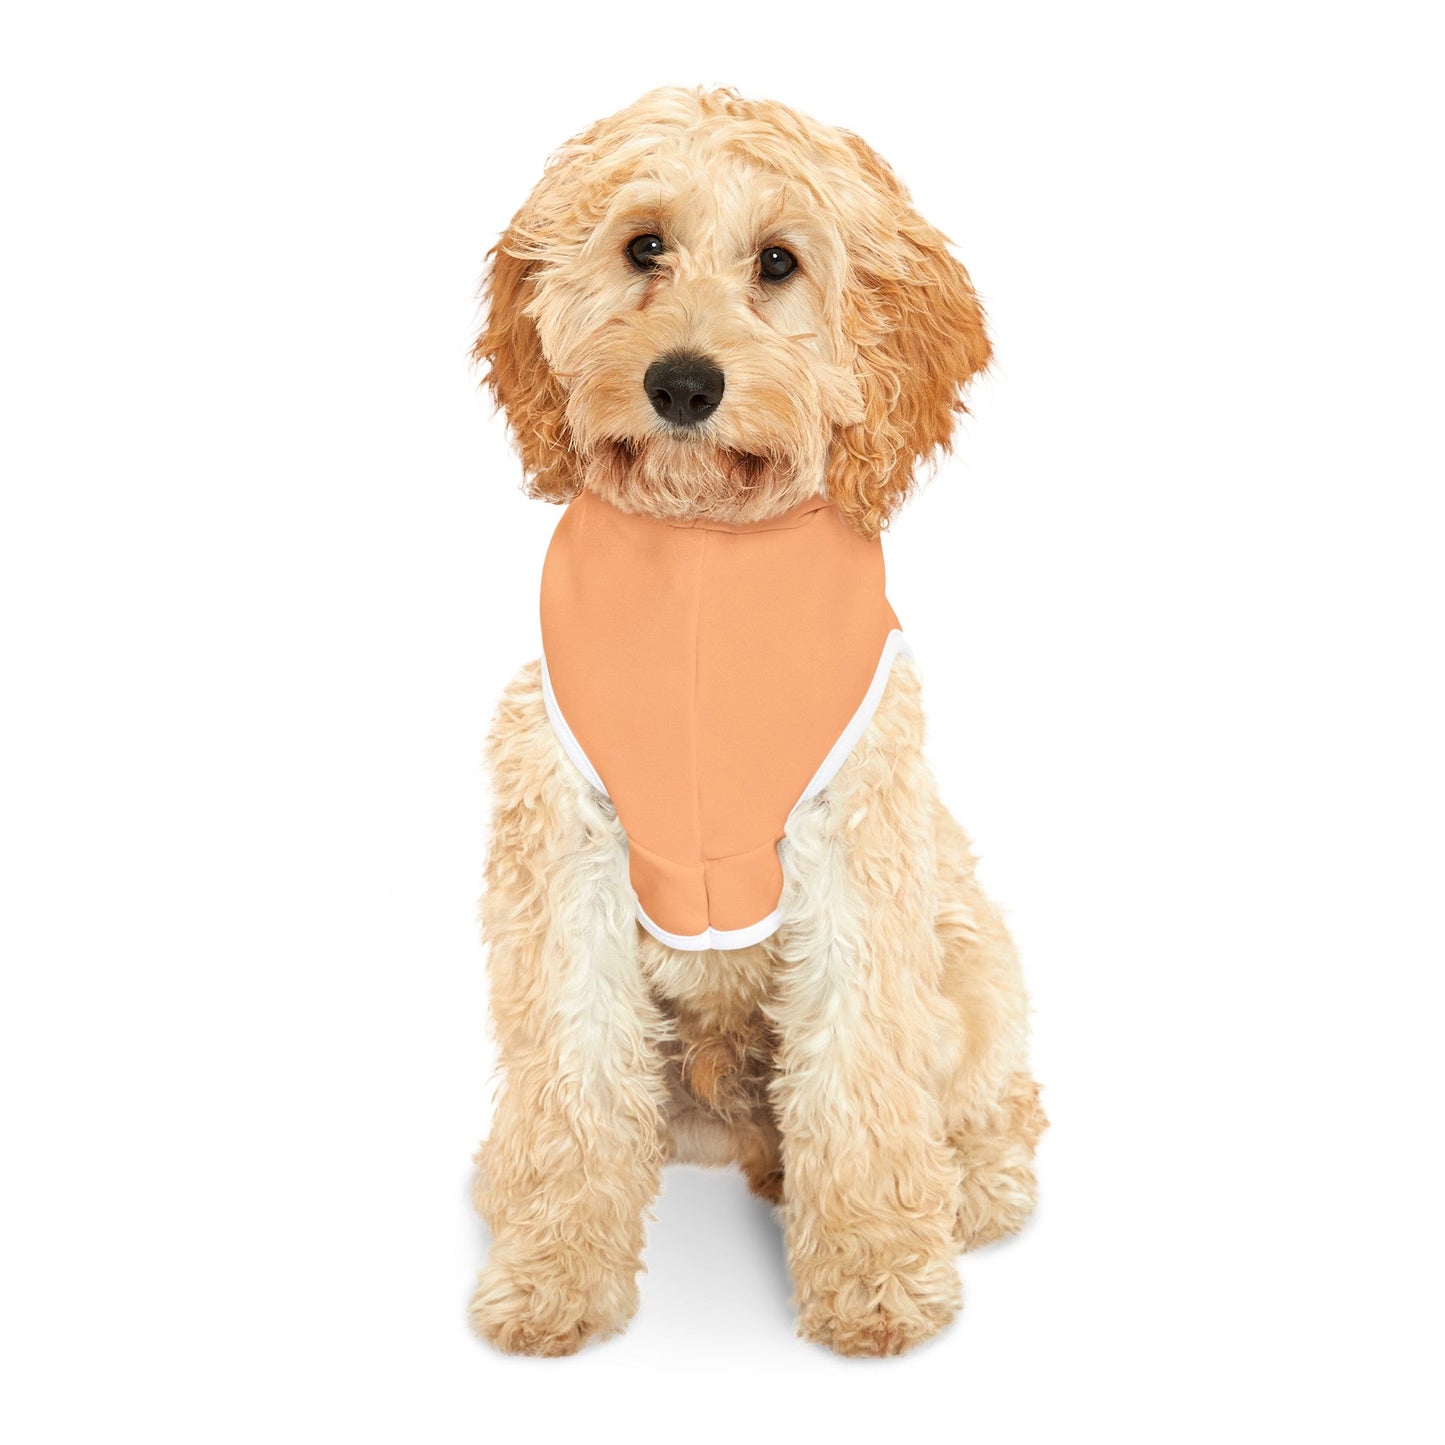 Bark for Bobby Pet Hoodie in Orange - TEAM KENNEDY. All rights reserved